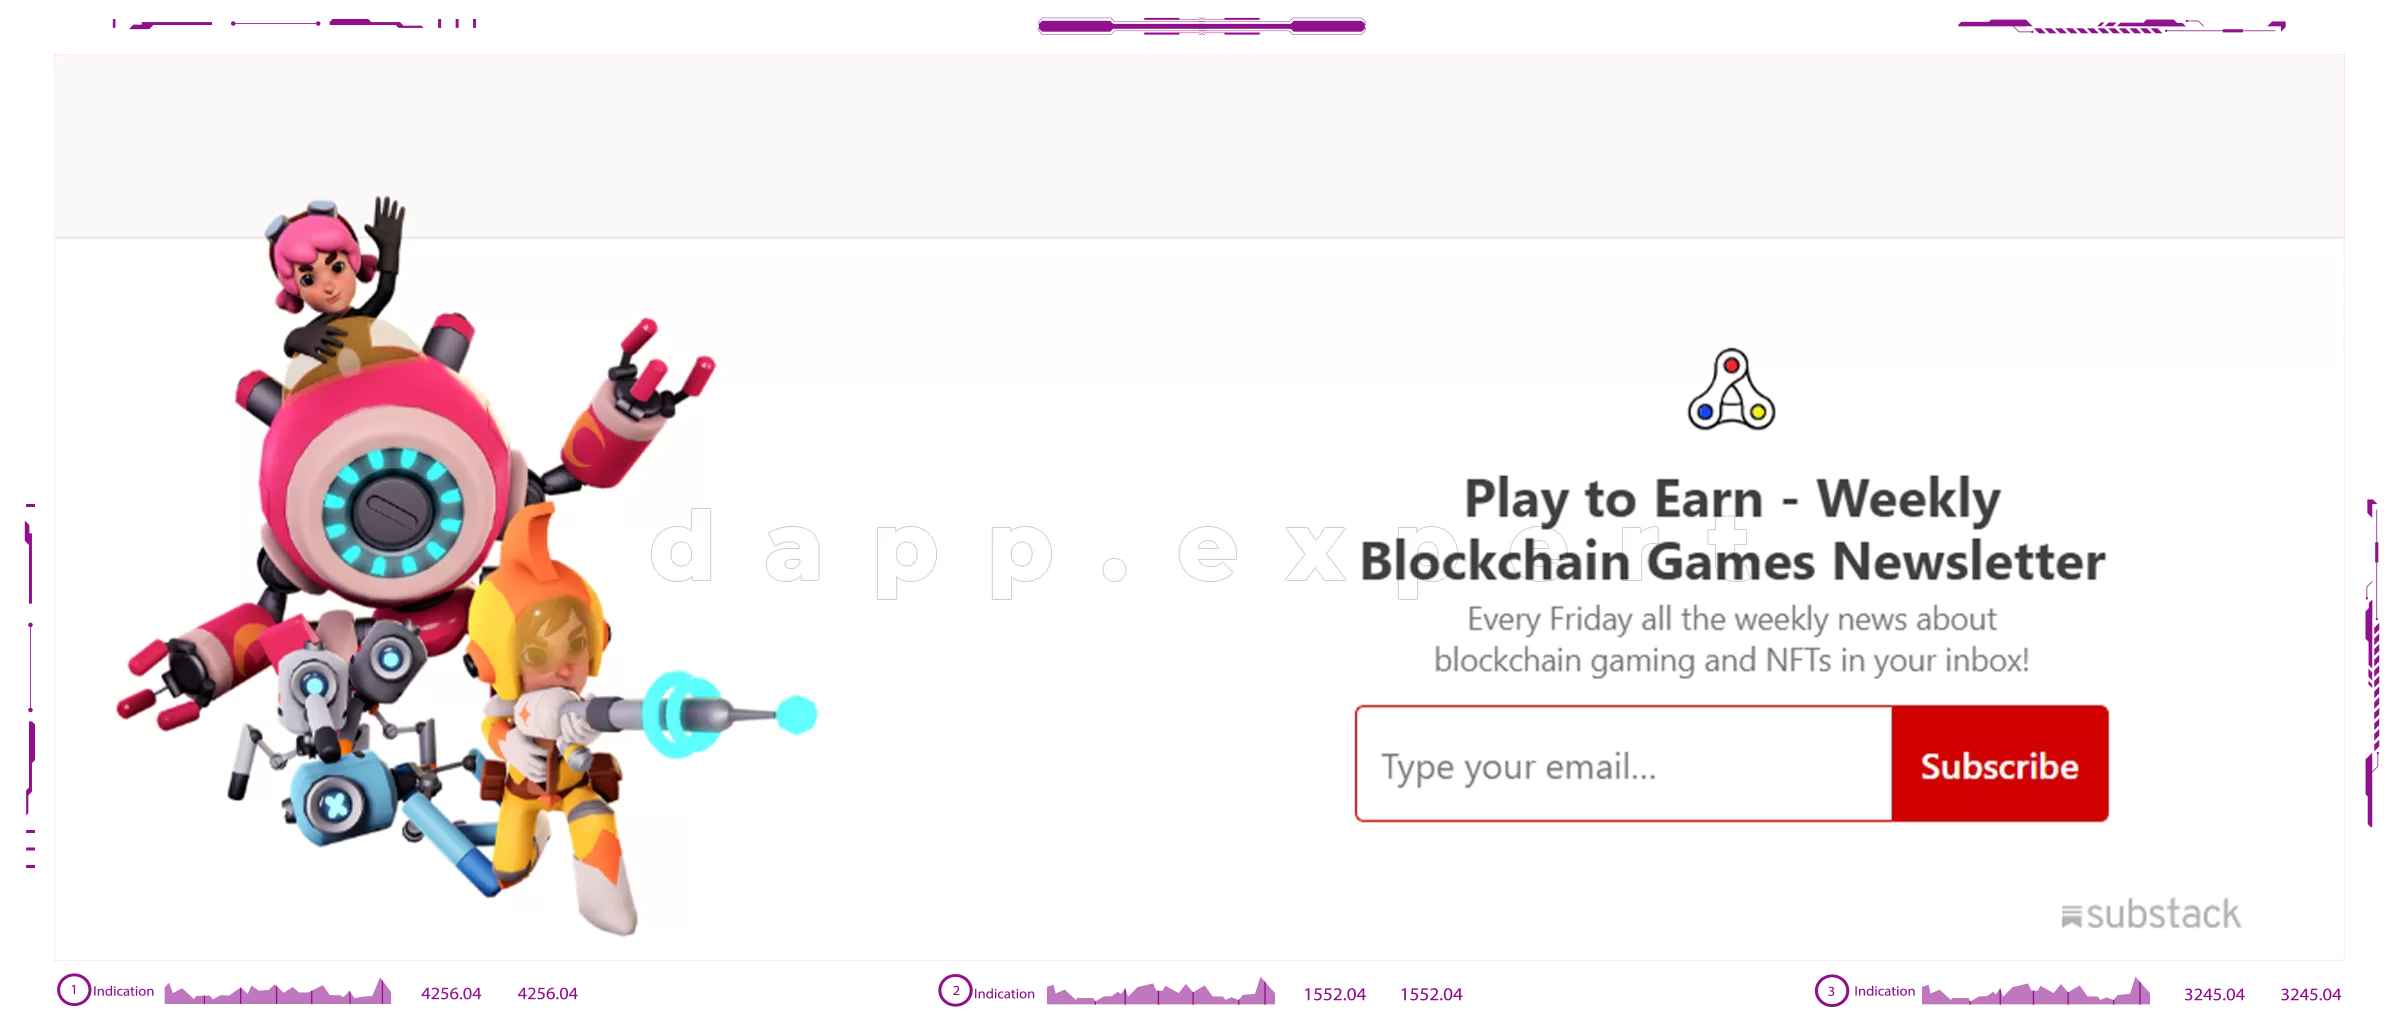 Dapp Play to Earn NFT Collection